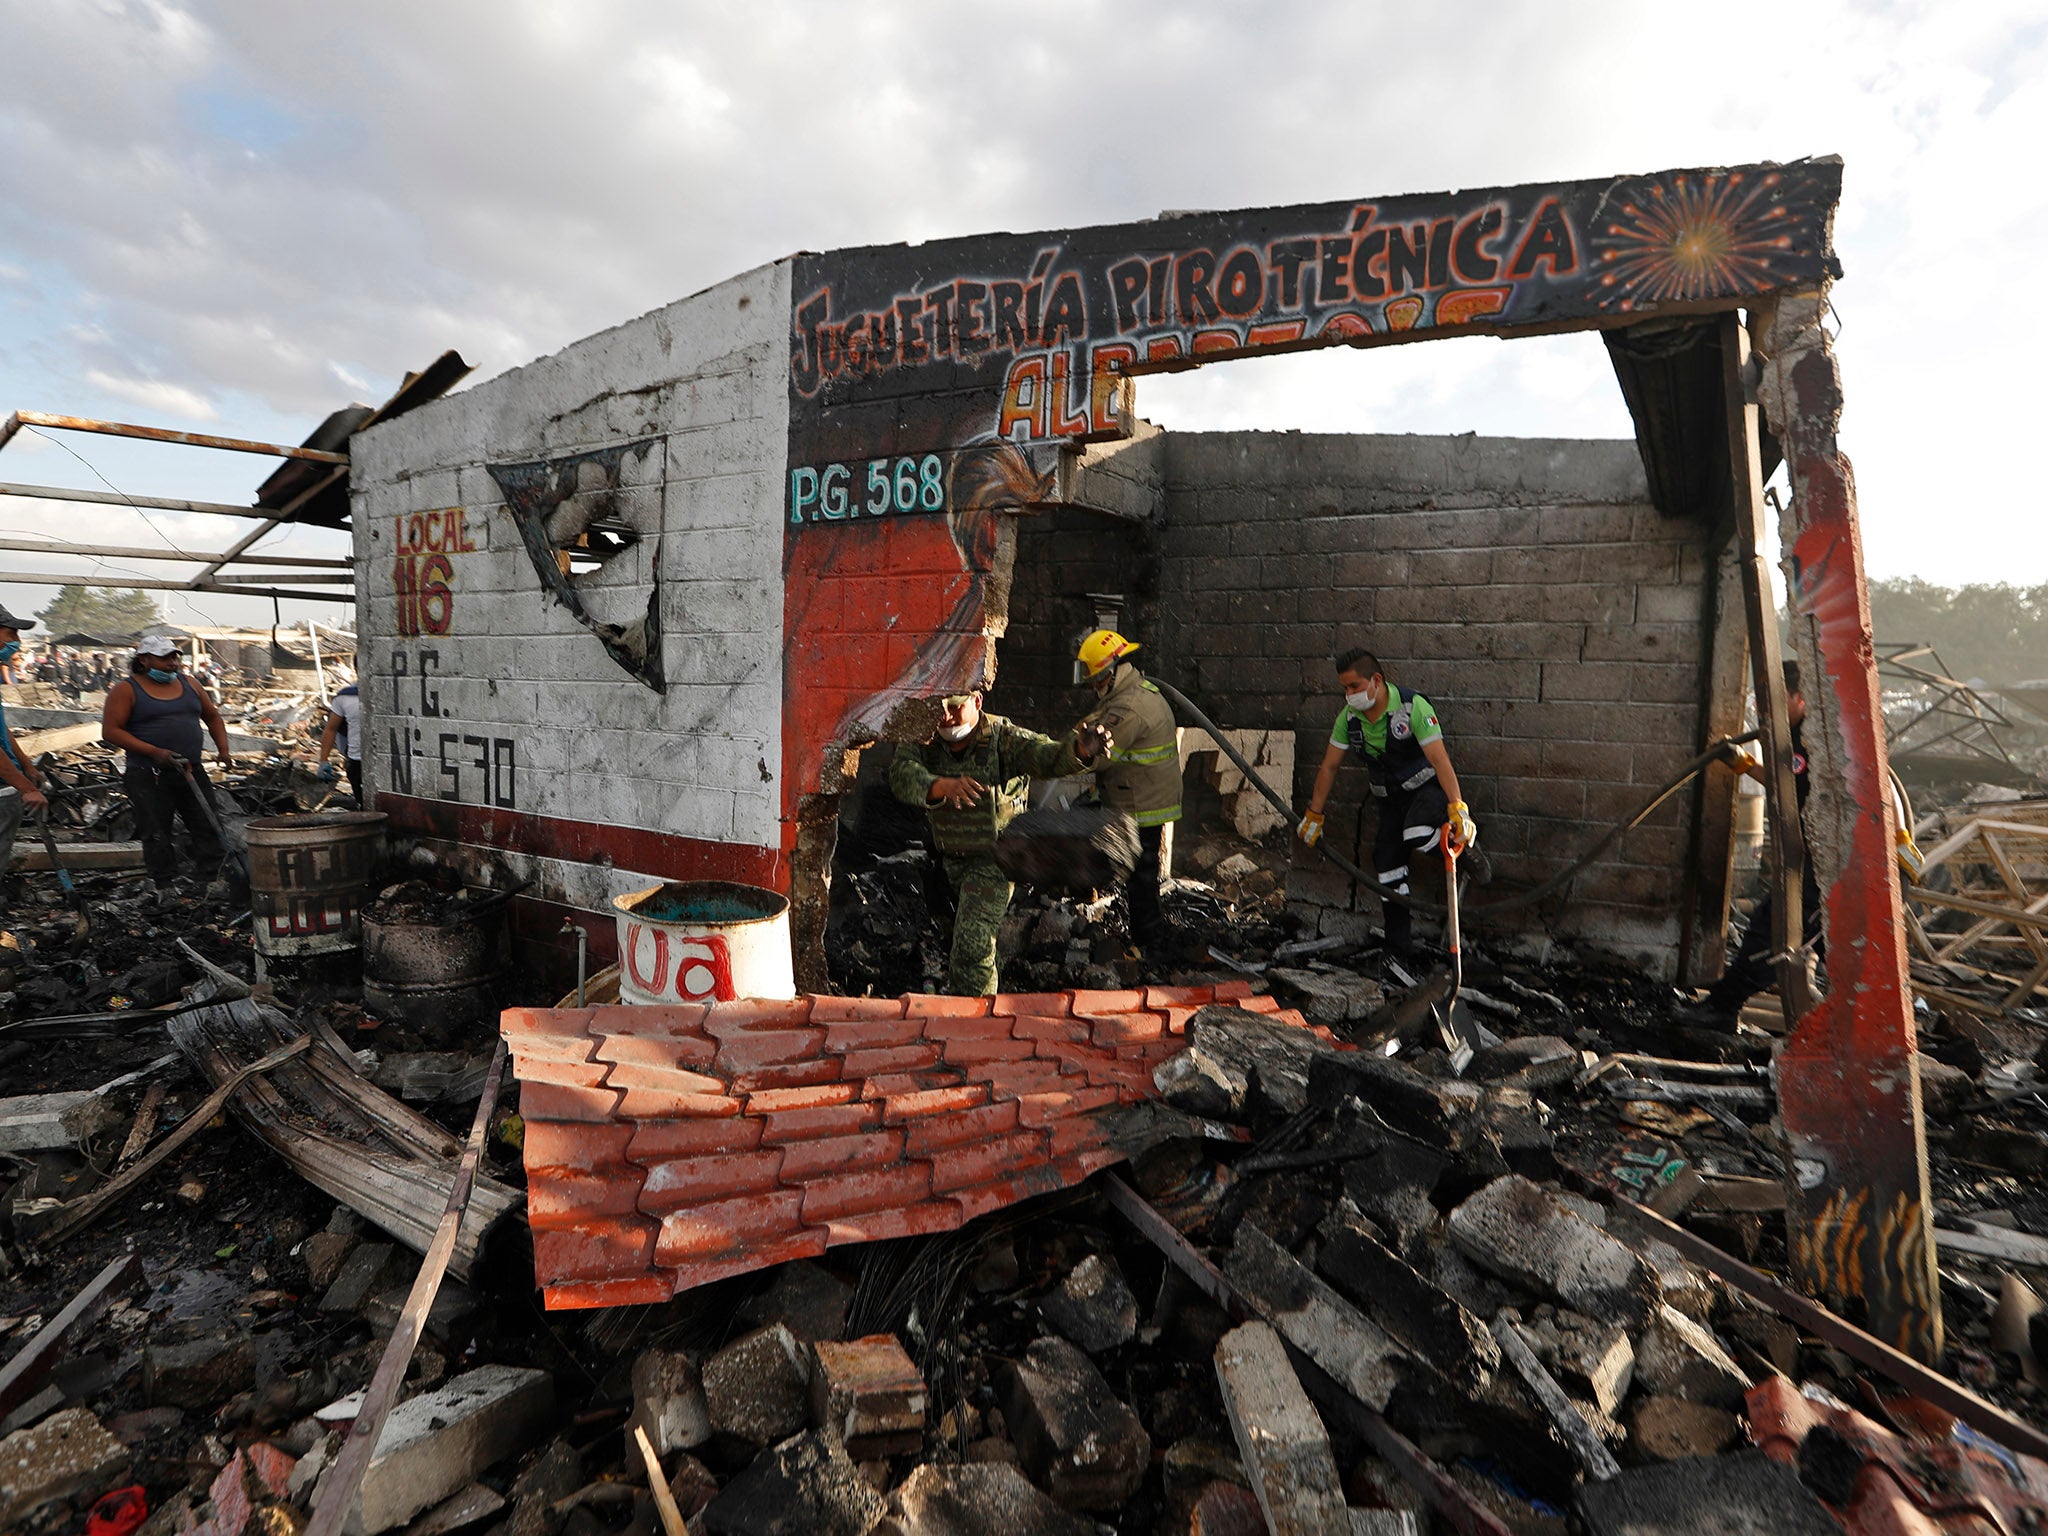 Firefighters and rescue workers remove debris from the scorched ground of Mexico's fireworks market in Tultepec